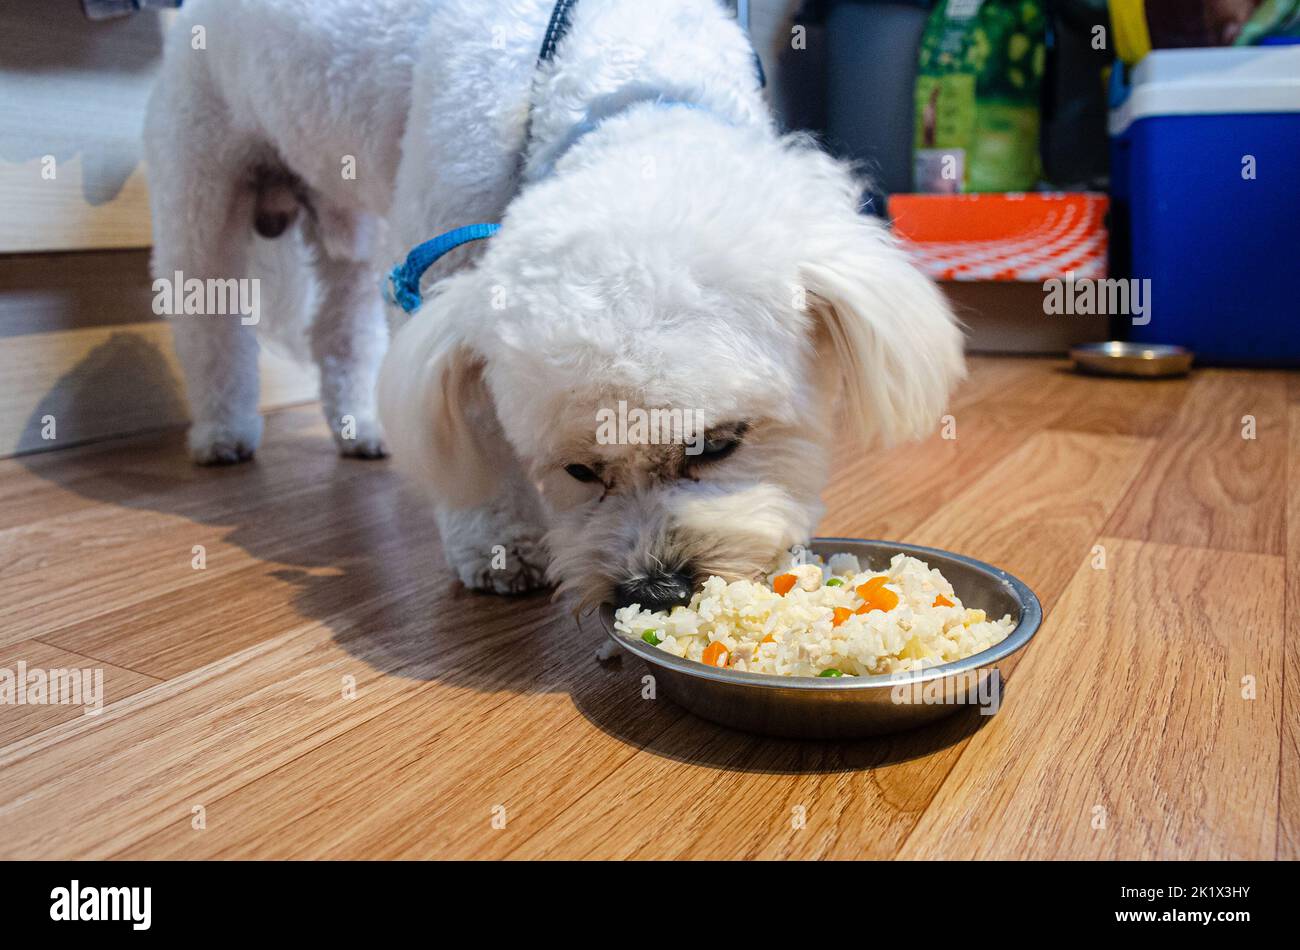 A small, white cavapoo dog eating food from a metal bowl on the kitchen floor. Stock Photo